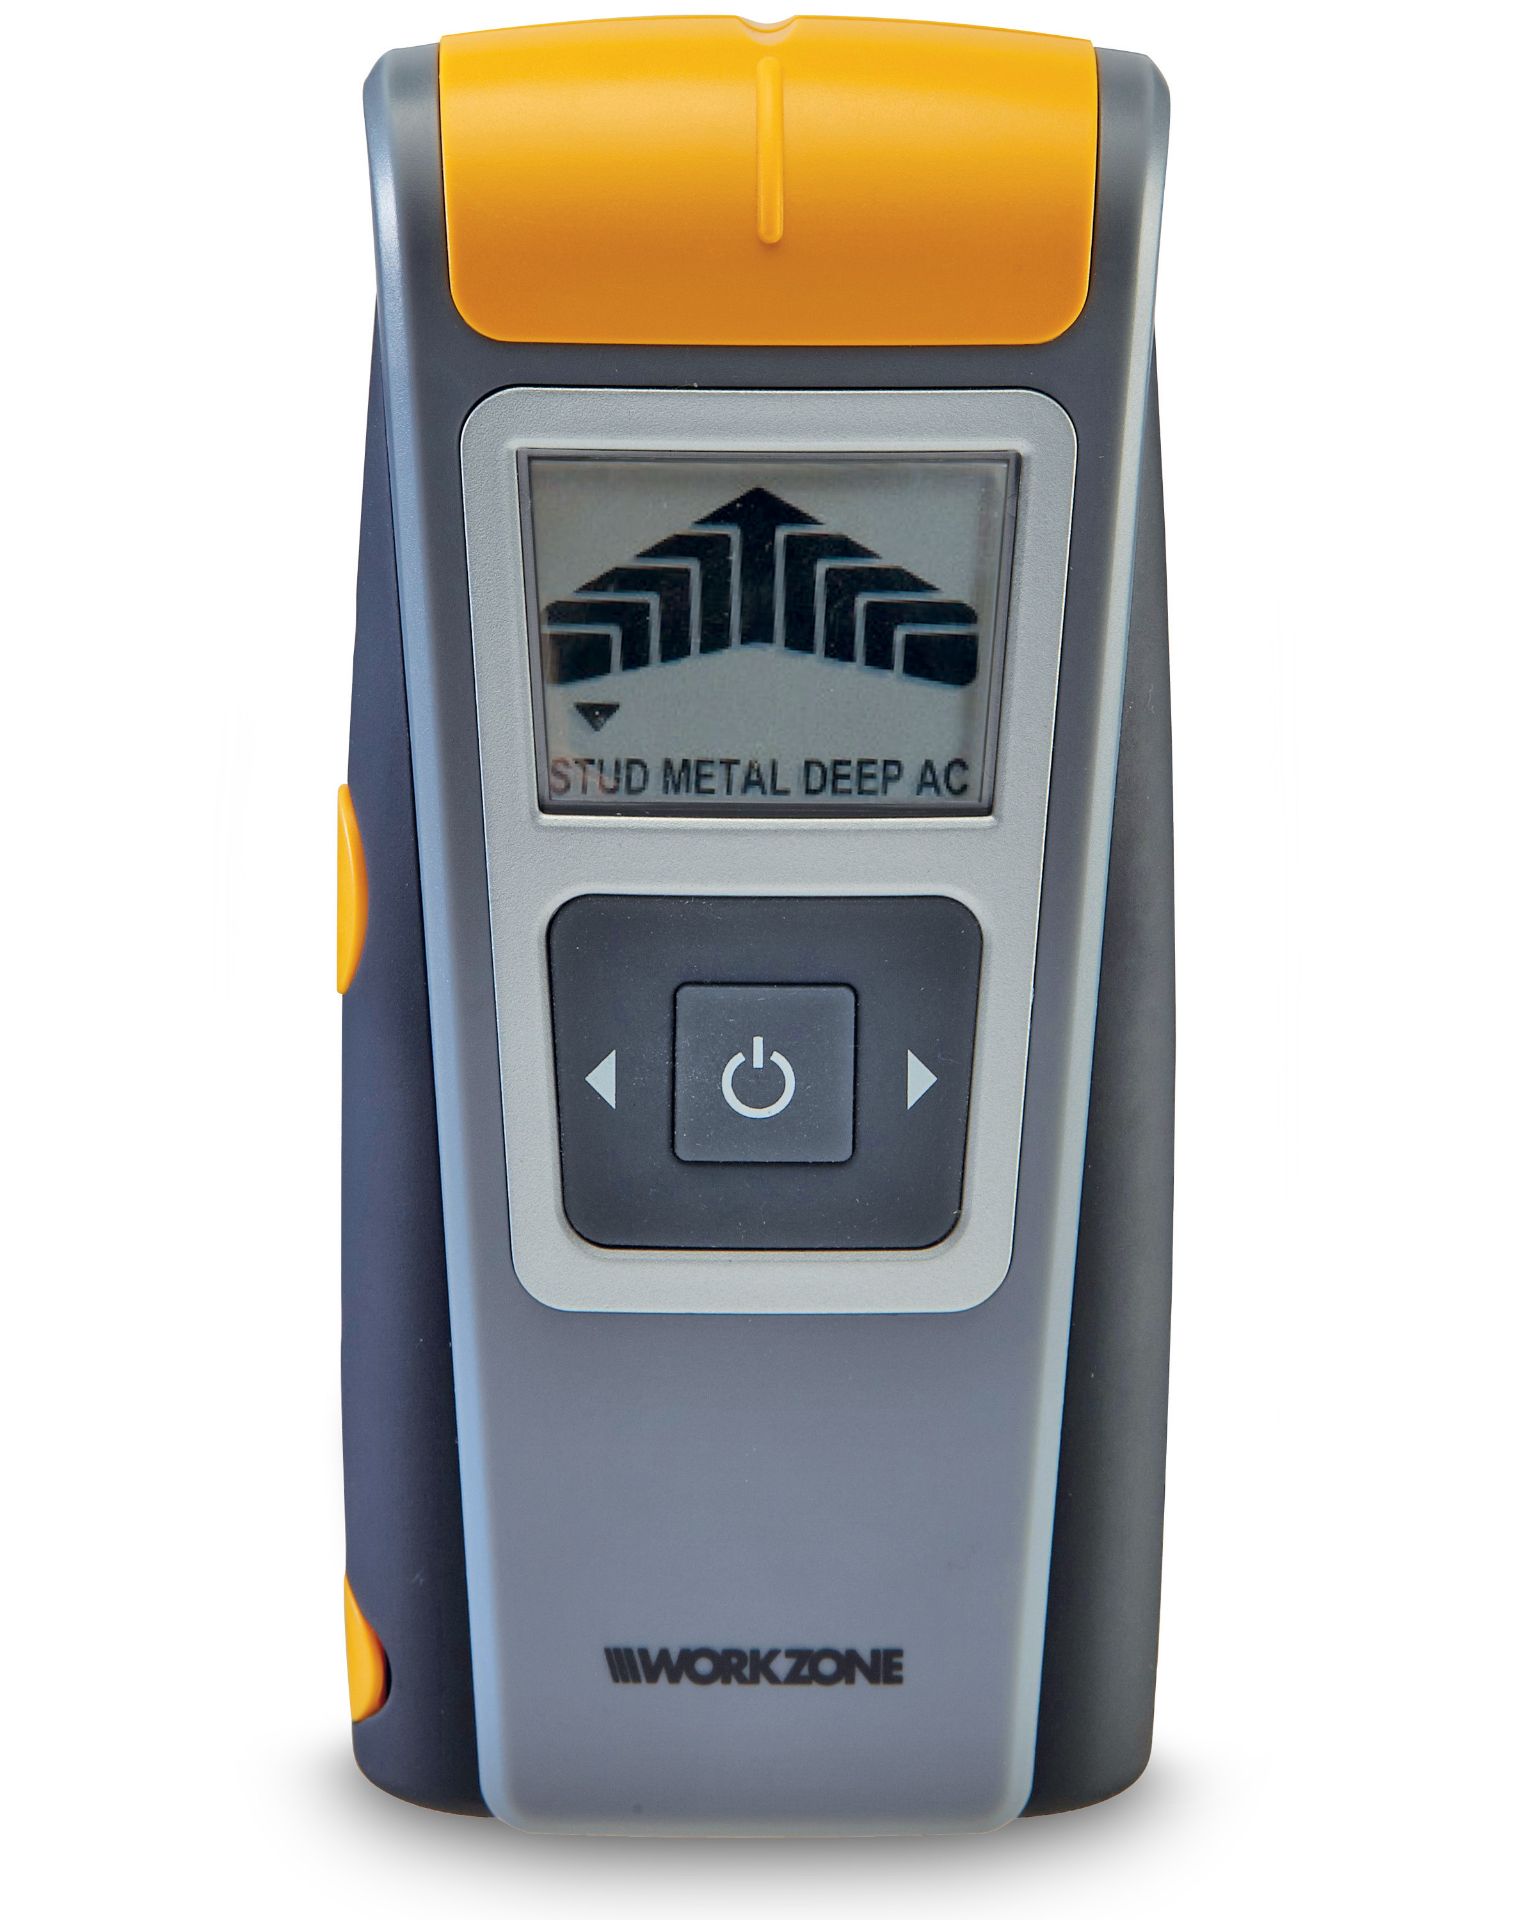 V *TRADE QTY* Brand New LCD Display Workzone Multi-Sensor For Detection Of Power Lines-Metal Or Wood - Image 2 of 2